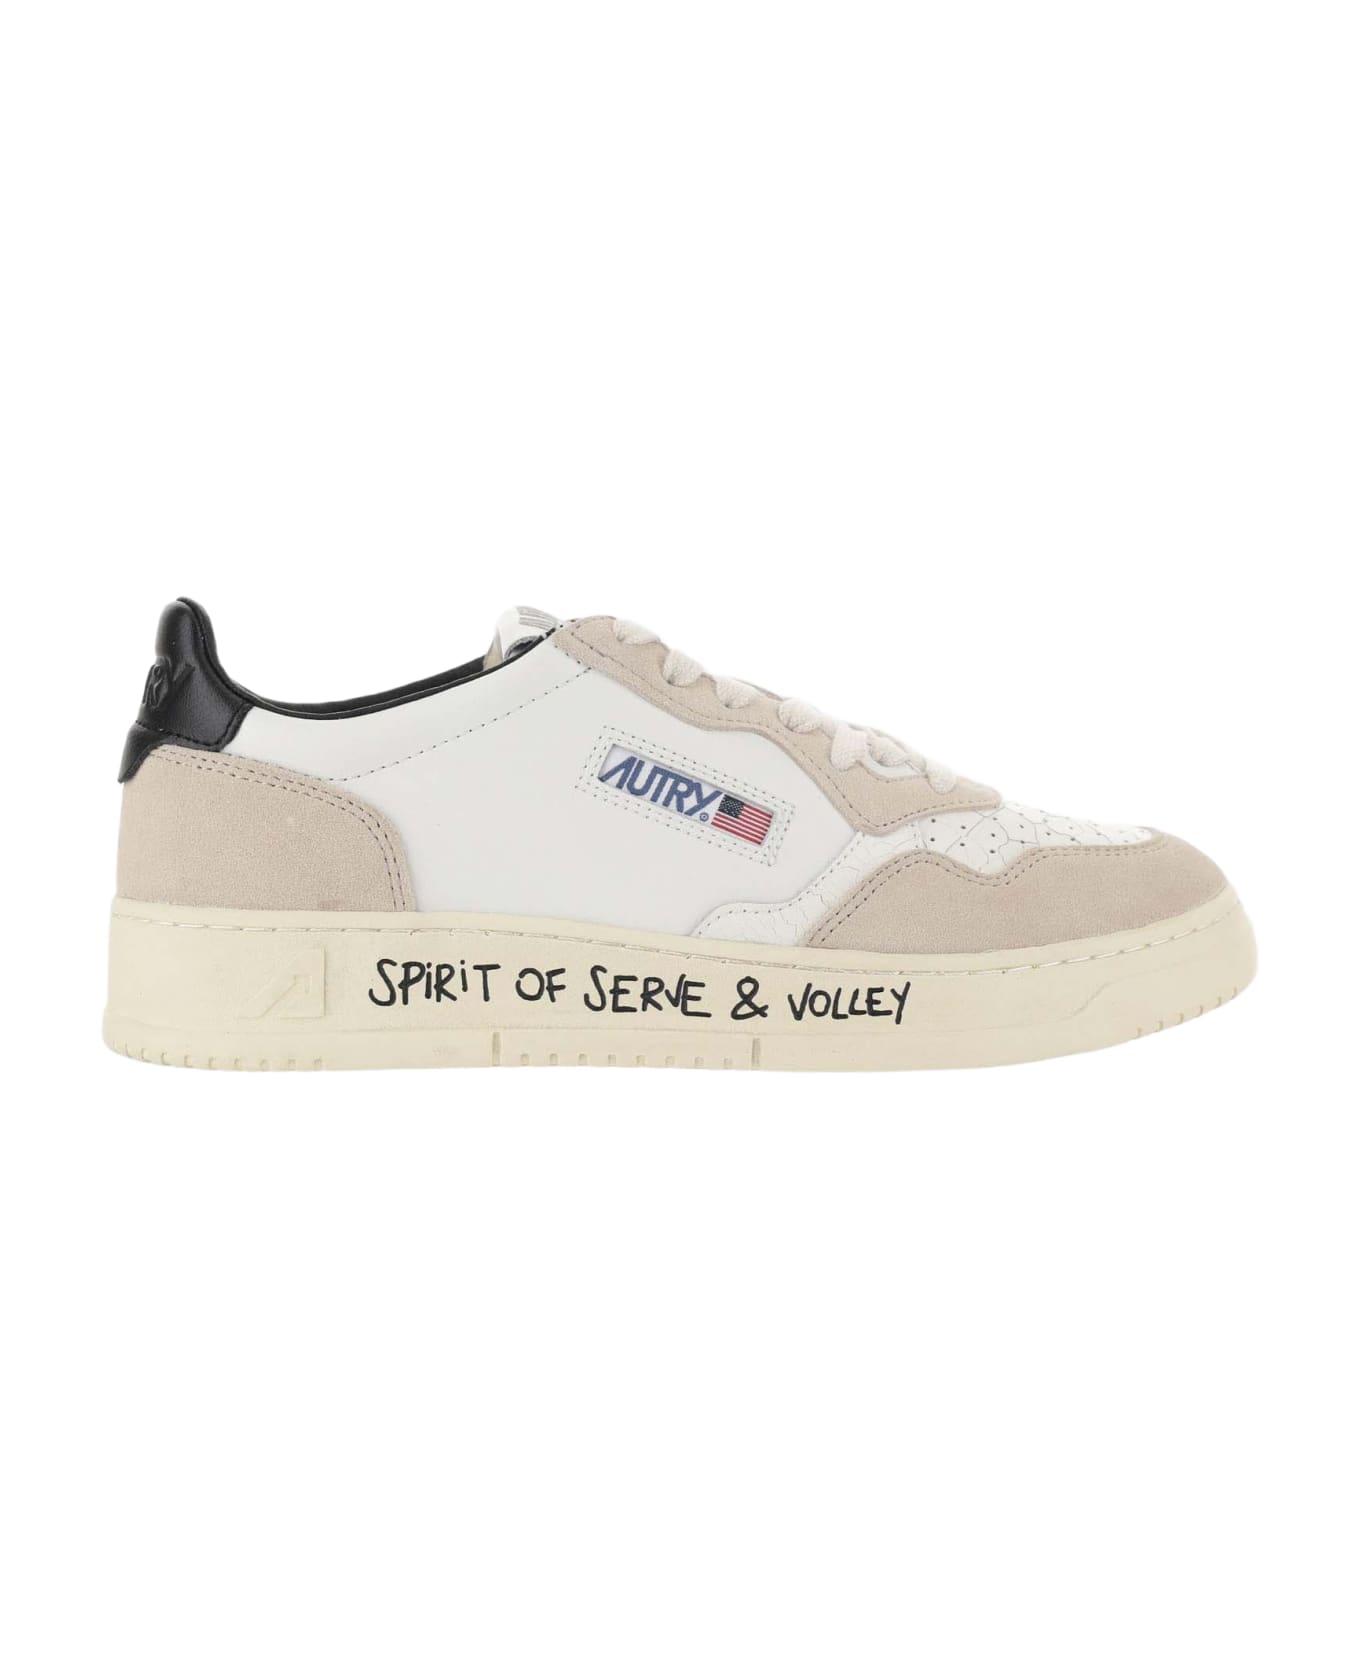 Autry Low Medalist Spirit Of Serve & Volley Sneakers - Bianco スニーカー